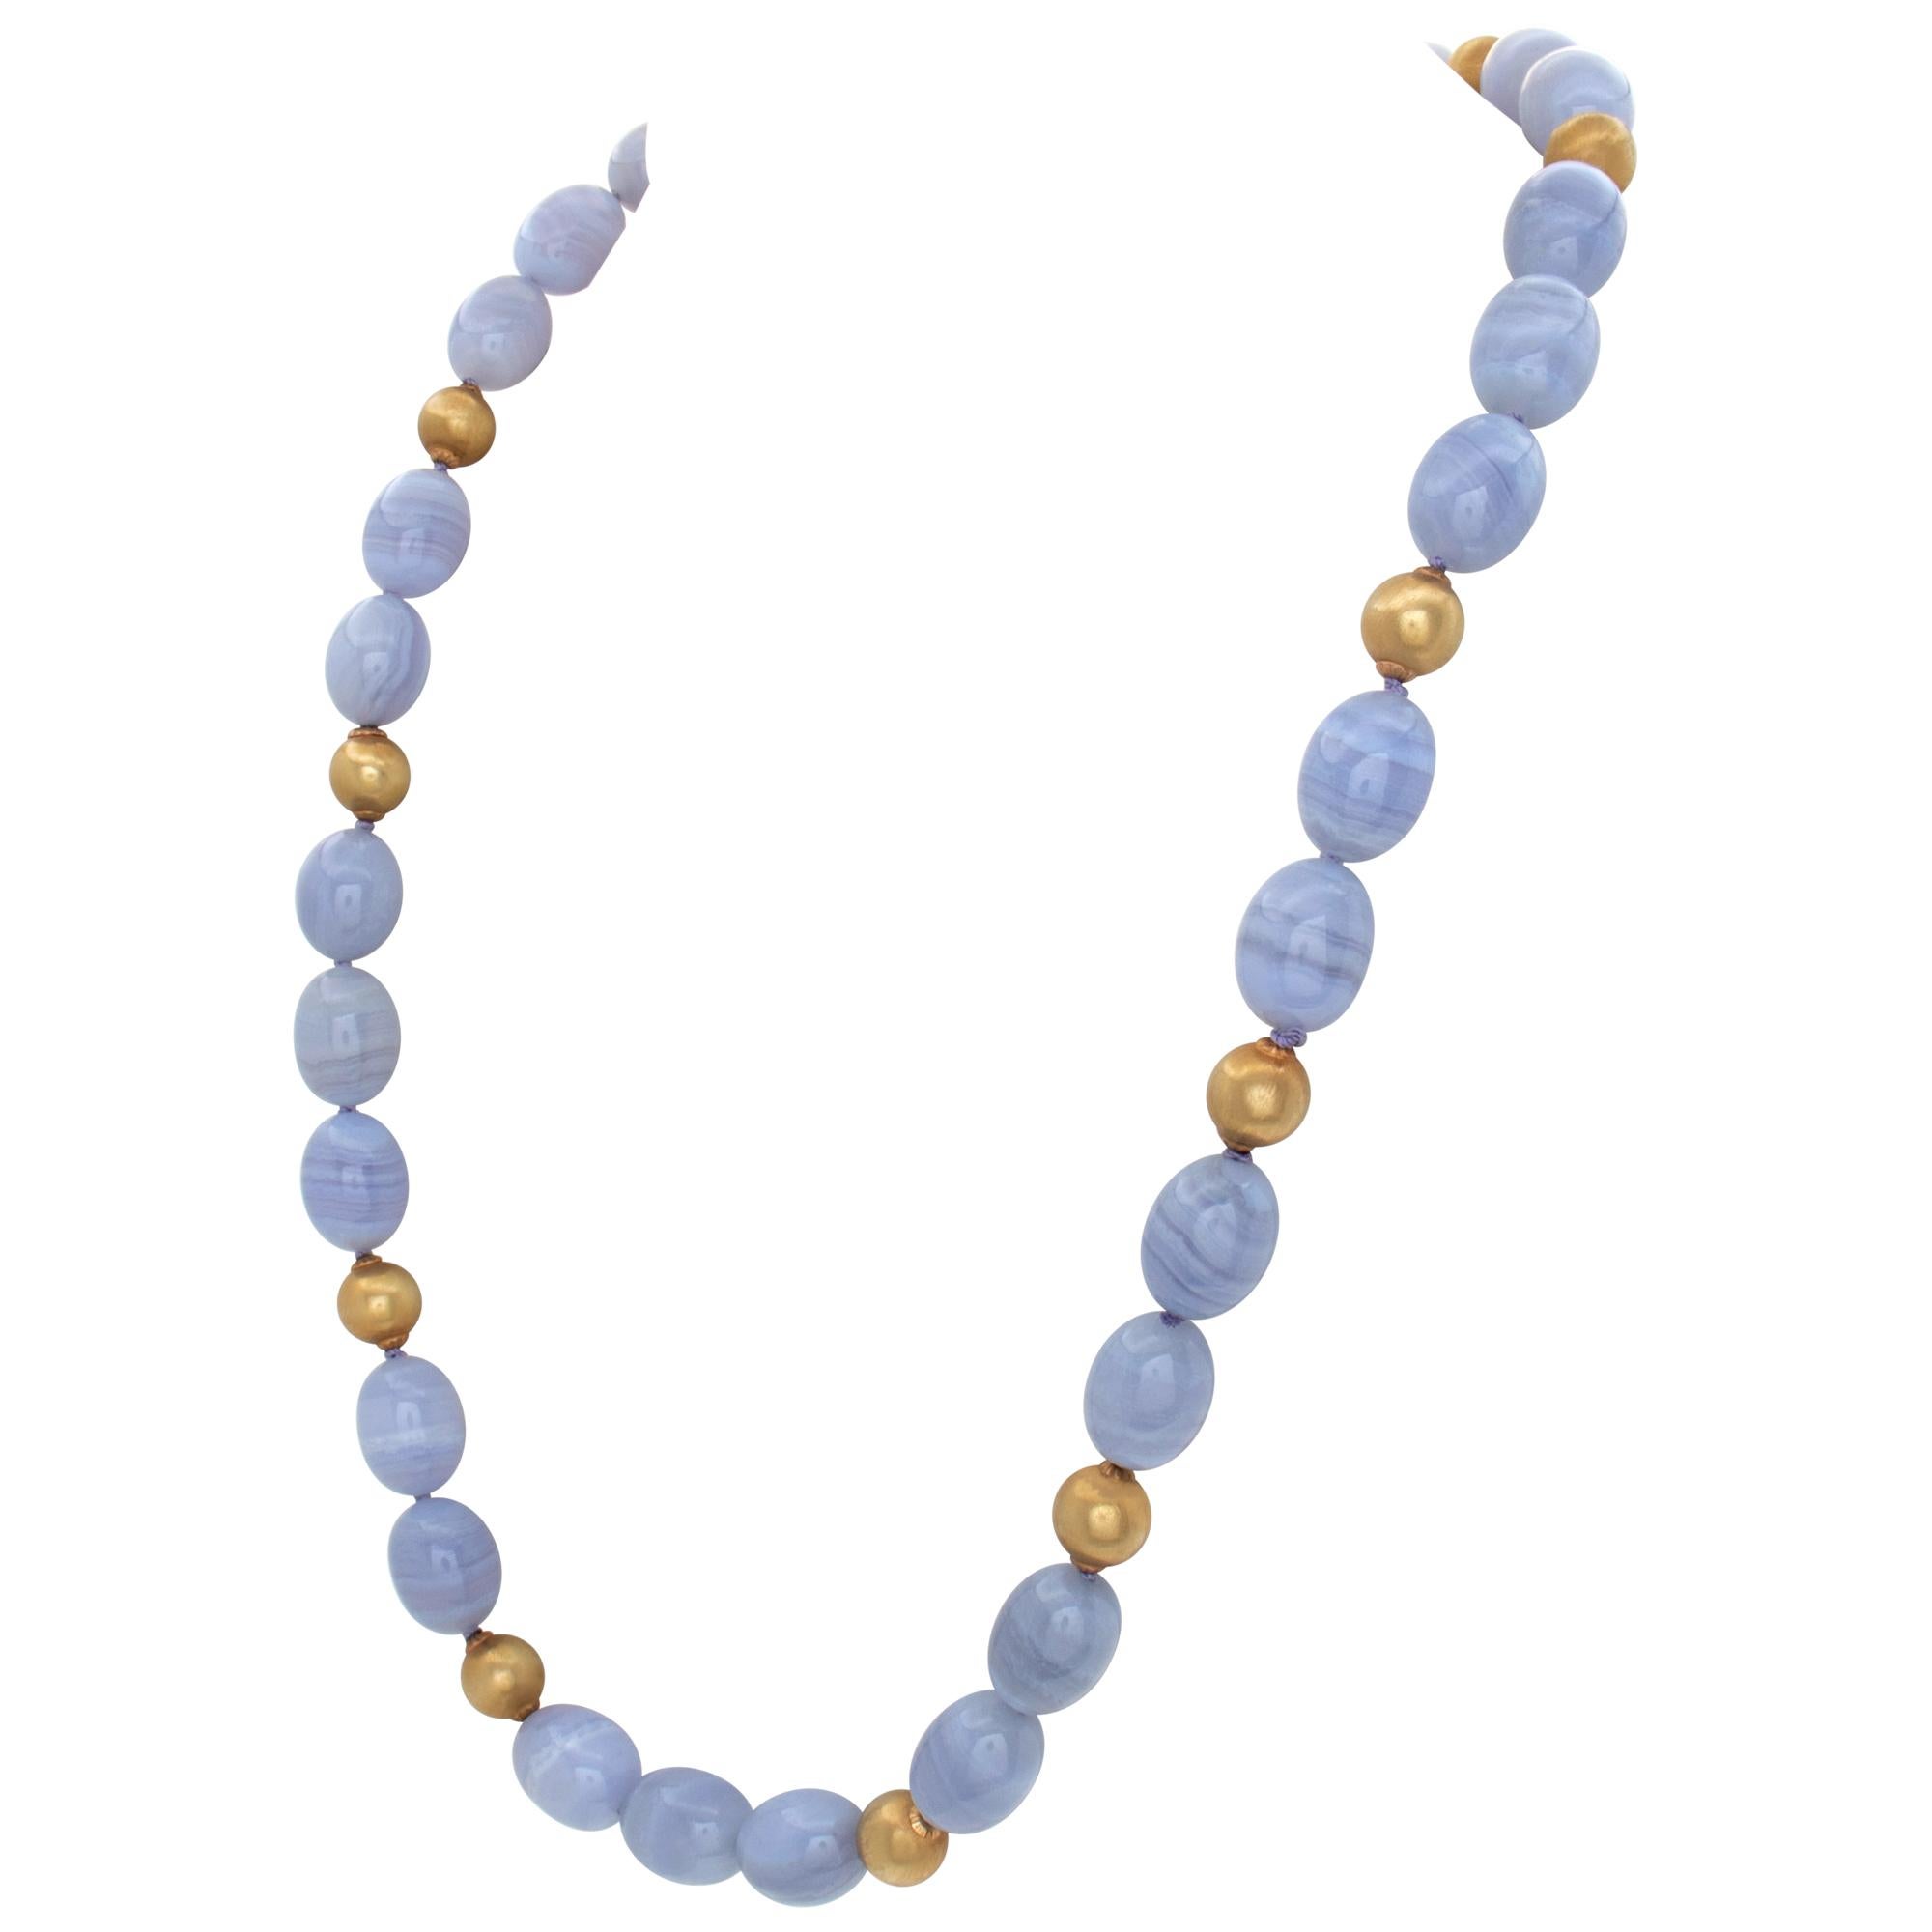 Blue lace chalcedony oval stone bead necklace with 12 18k gold bead station accents. Length 24 inches.
